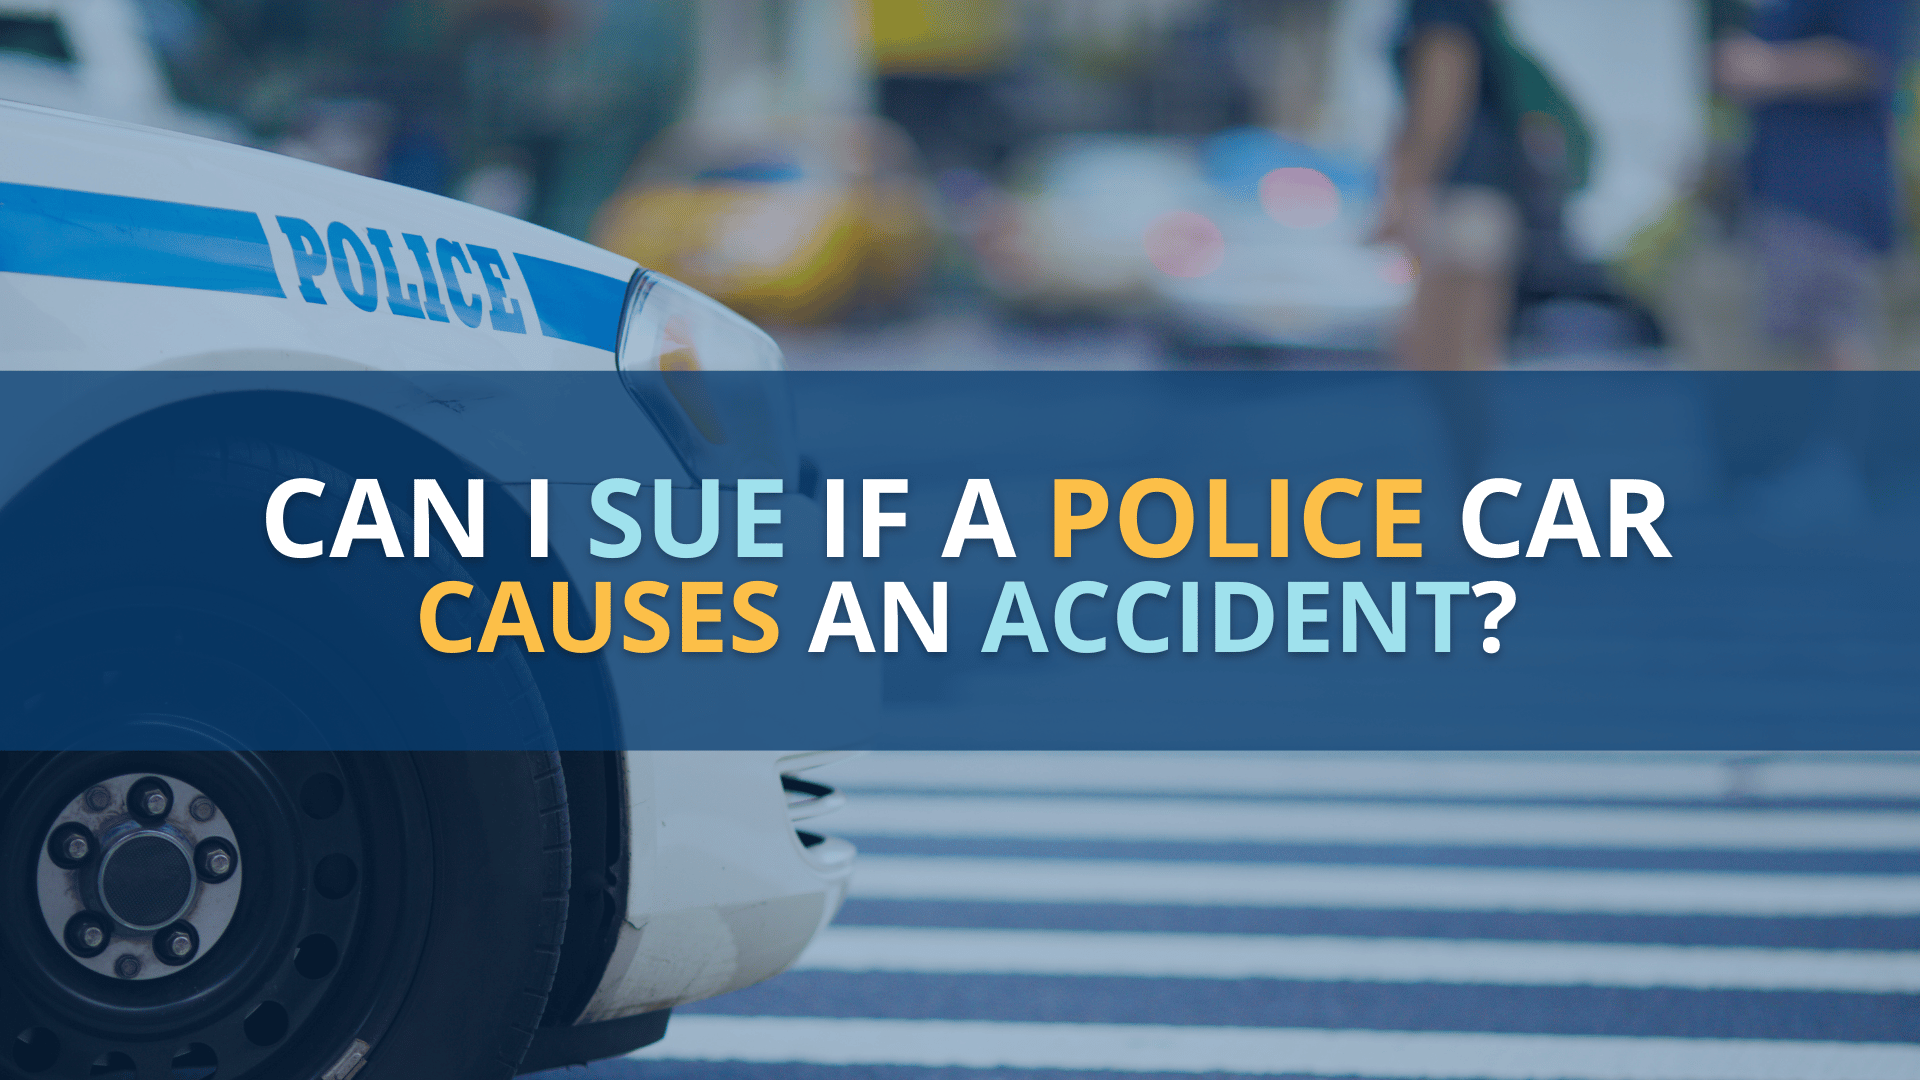 Can I sue if a police car causes an accident?